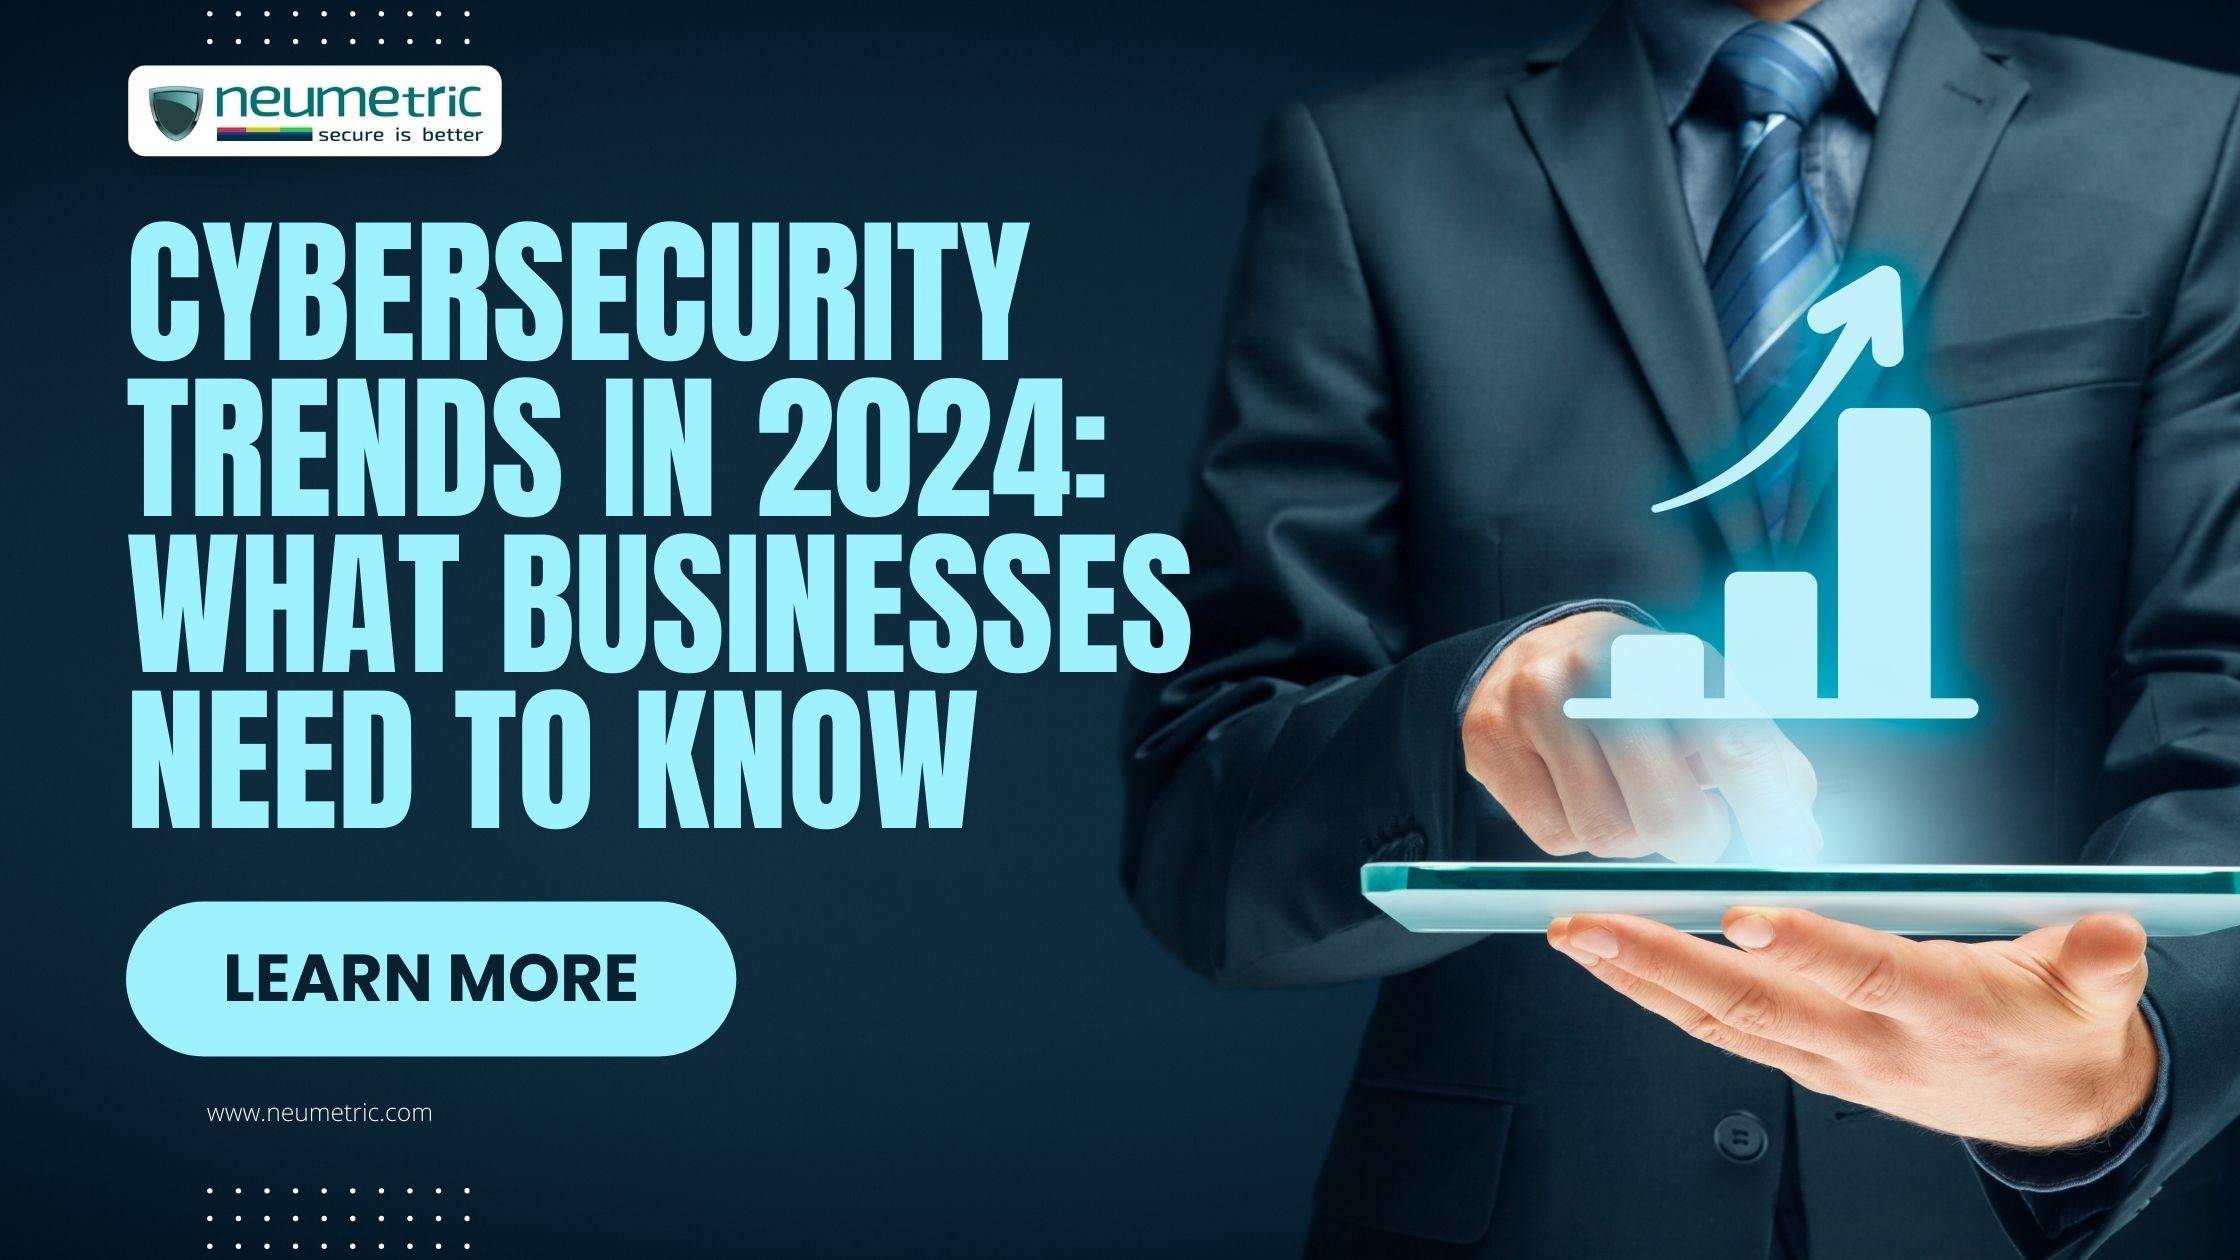 Cybersecurity trends in 2024: What businesses need to know